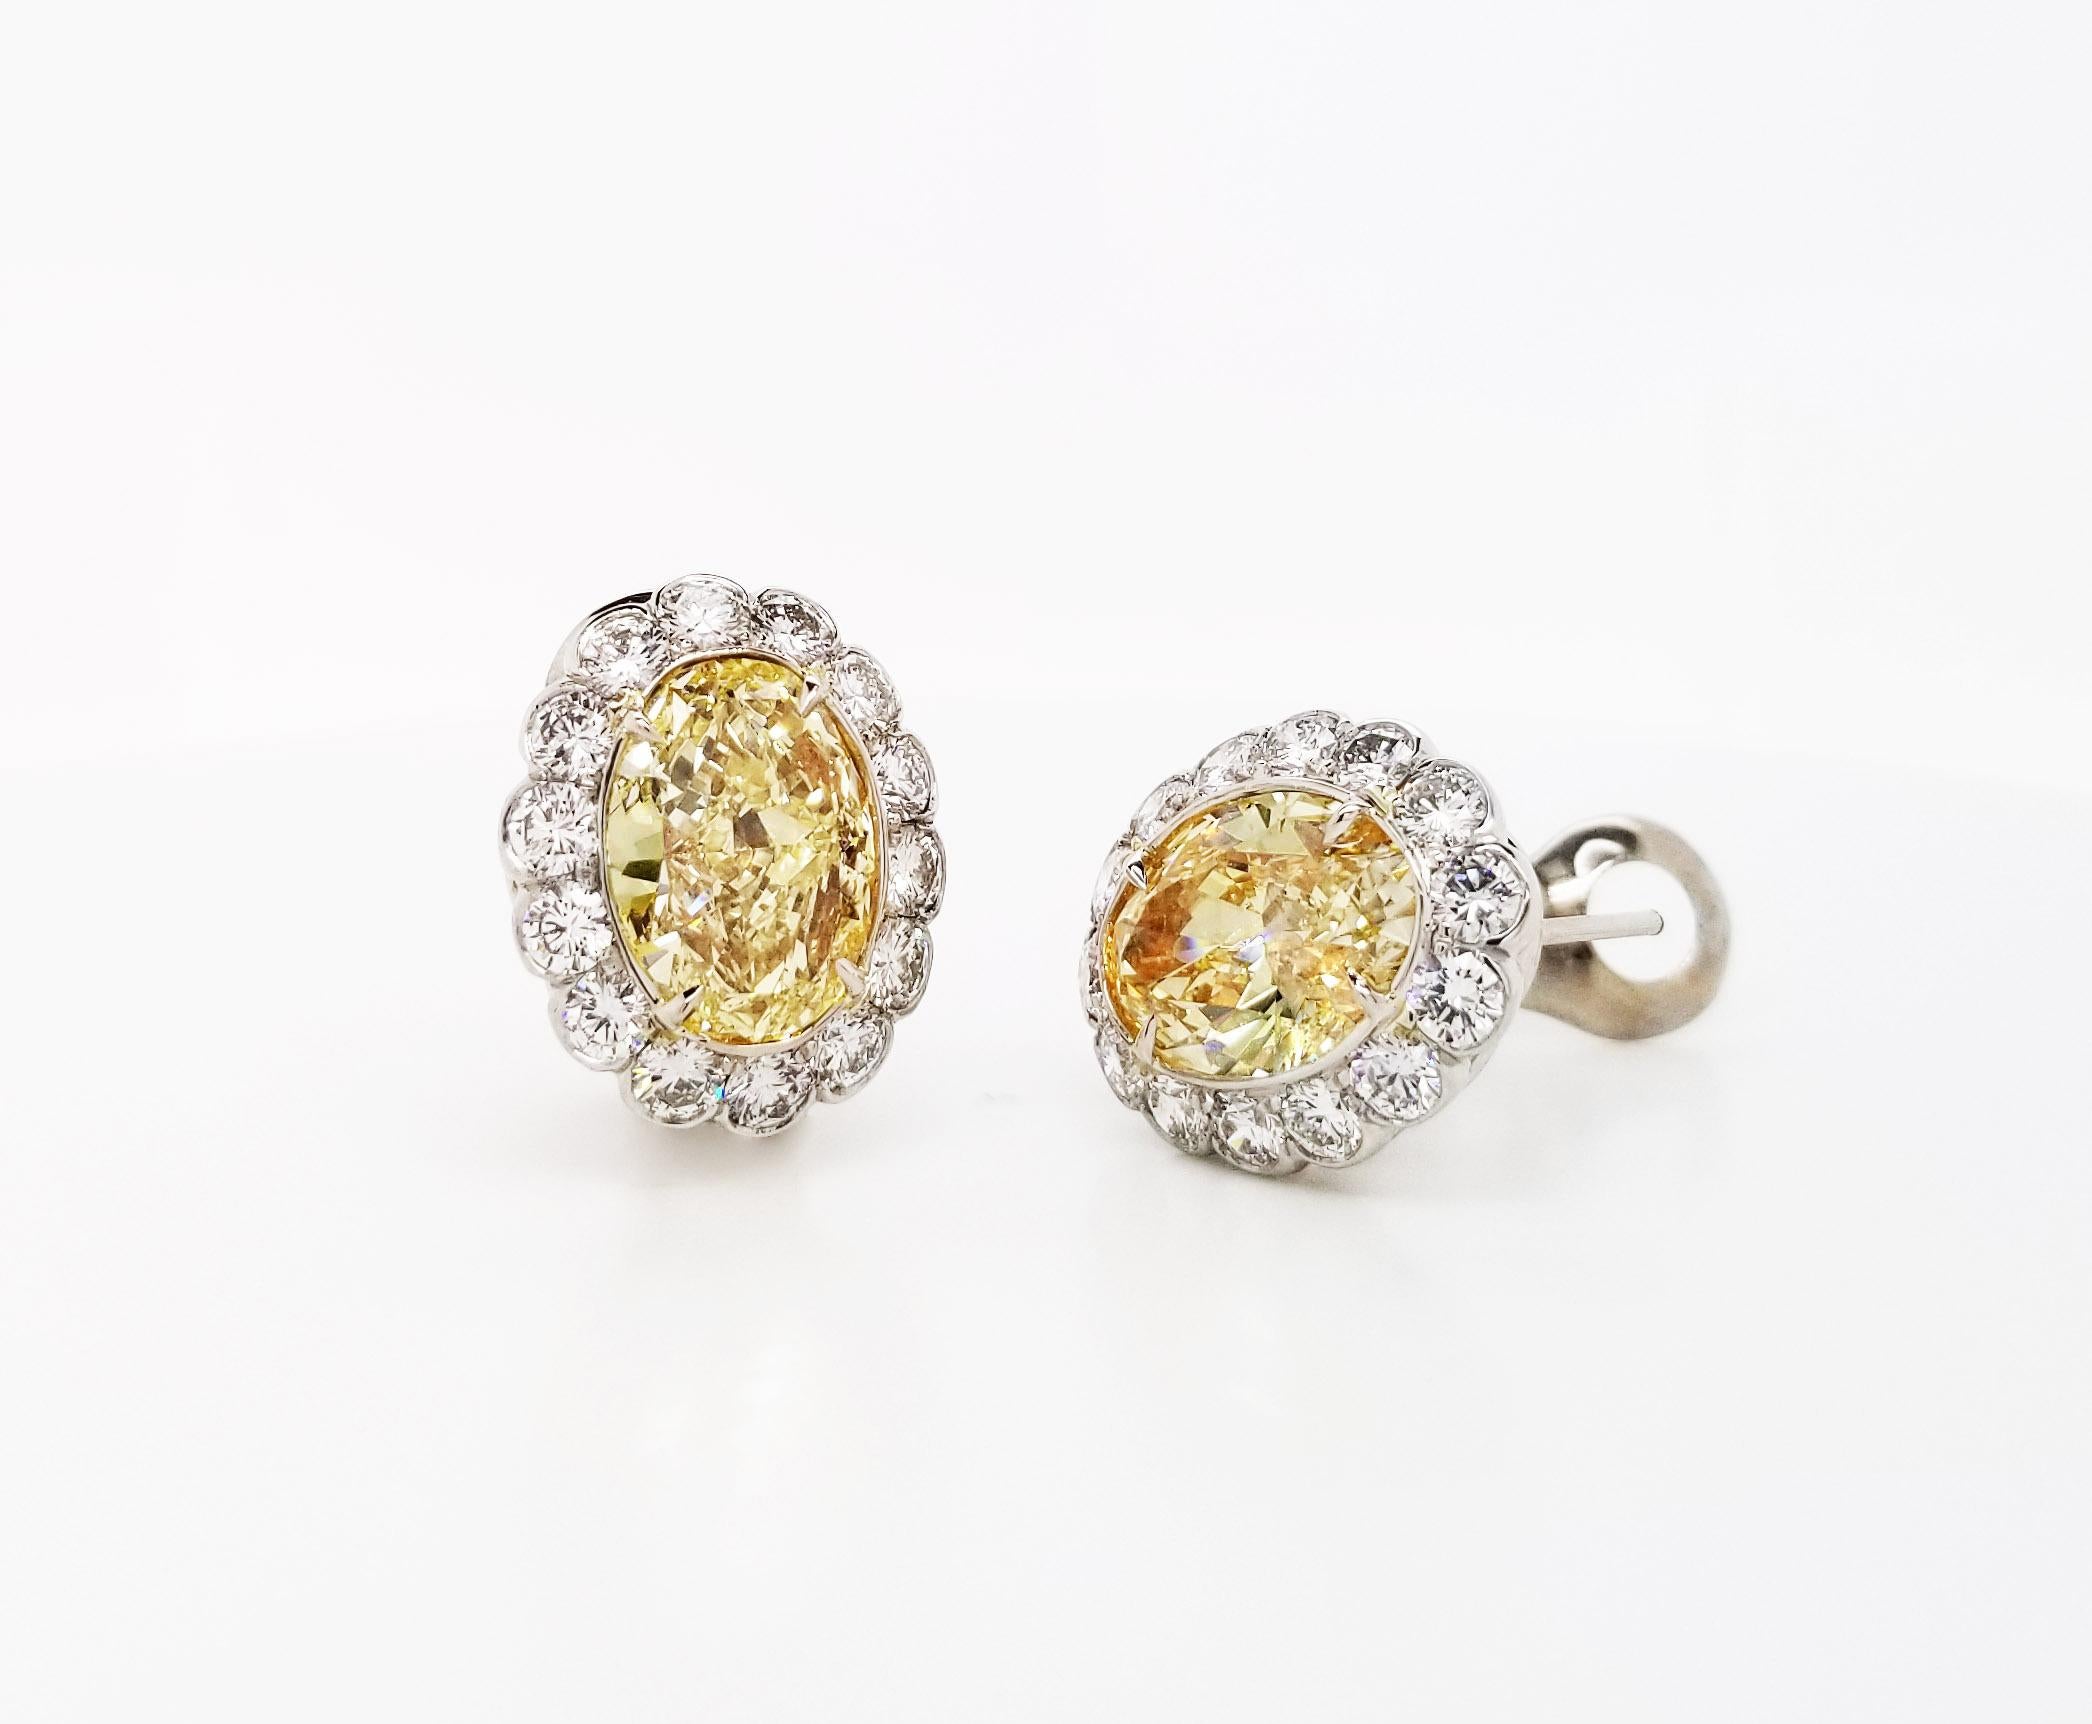 Contemporary Scarselli Stud Earrings with 4 Carat Fancy Yellow Diamonds GIA